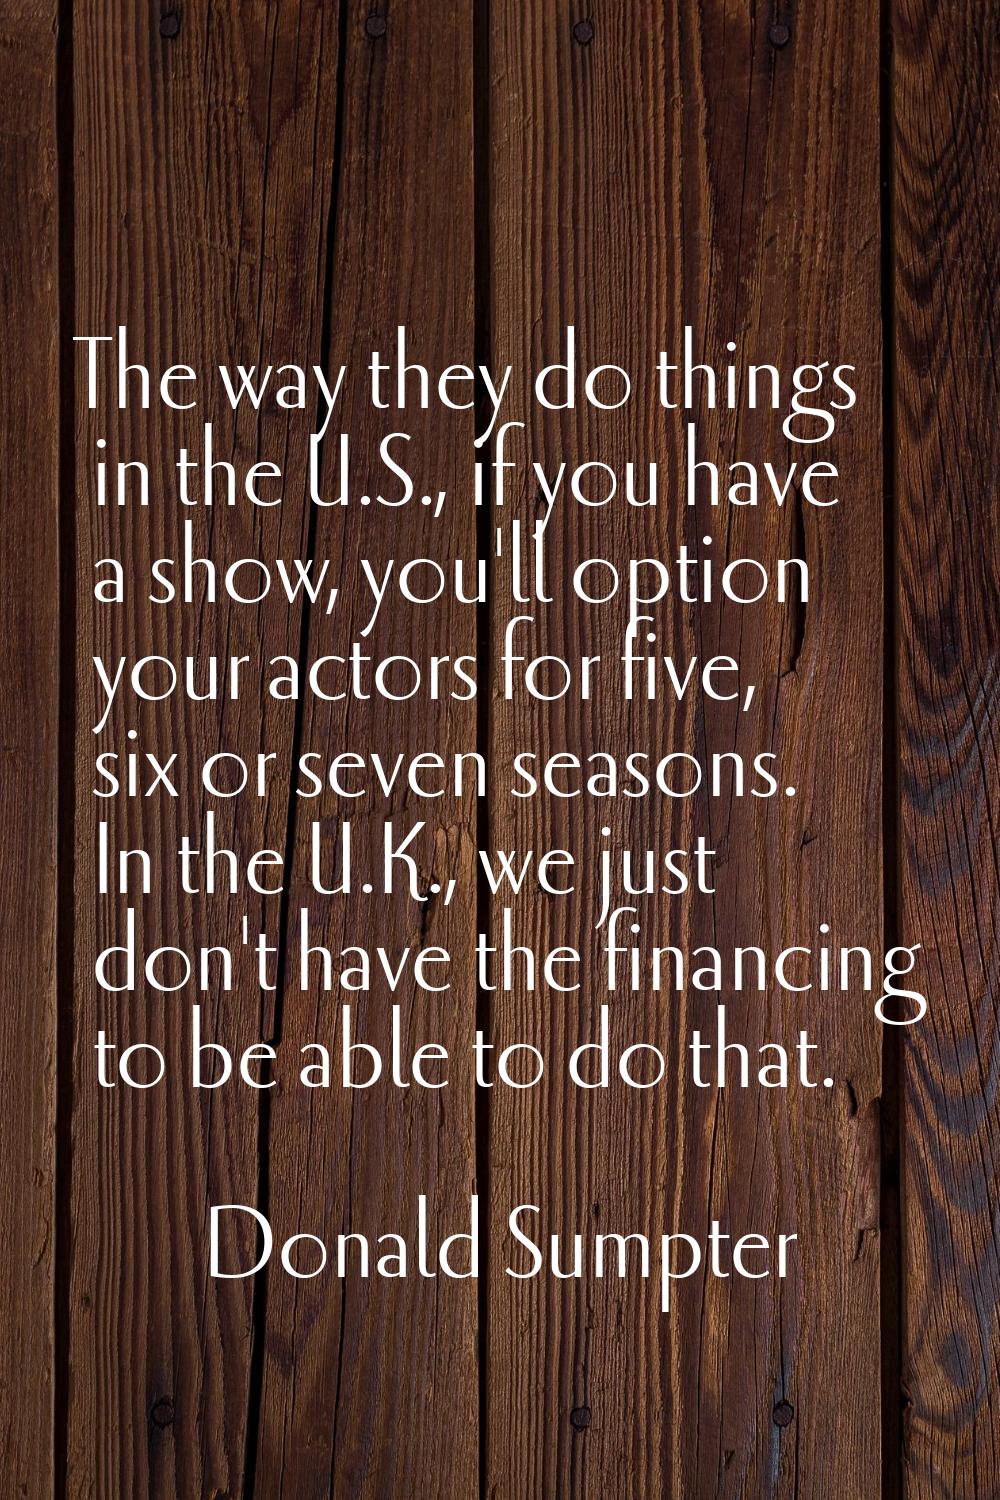 The way they do things in the U.S., if you have a show, you'll option your actors for five, six or 